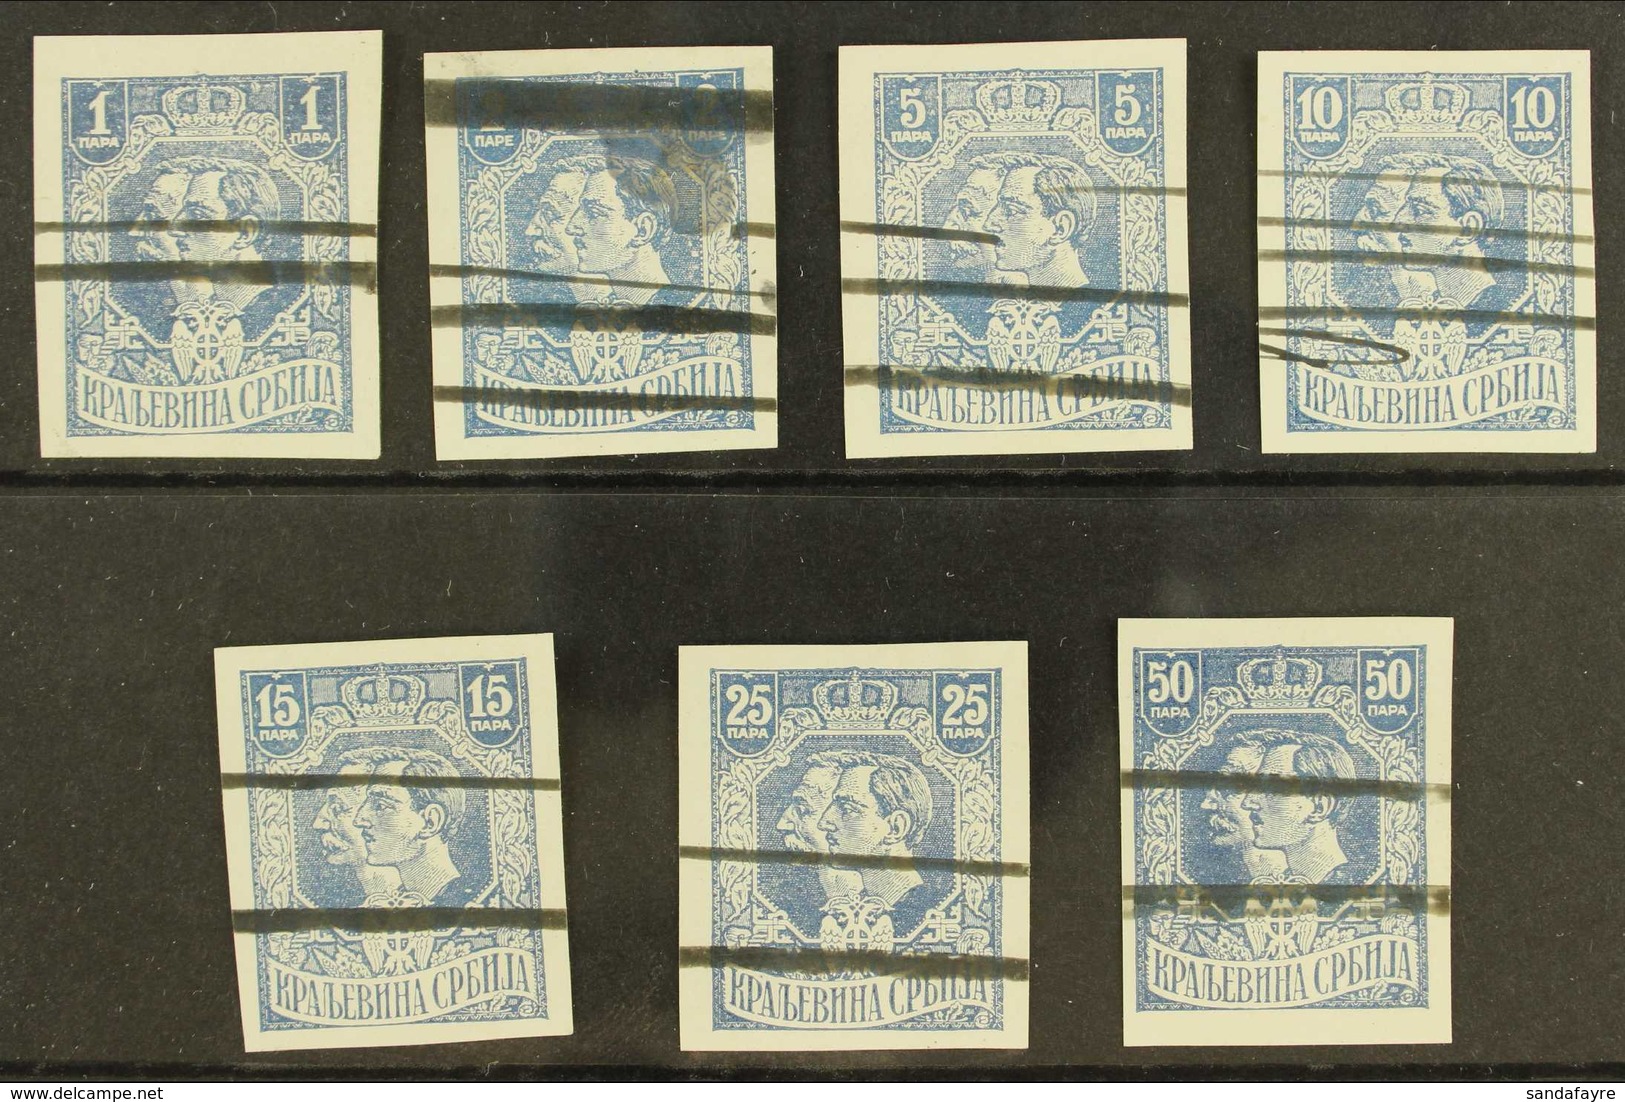 1918 IMPERF PROOFS For The 'King Petar & Prince Alexander' Due Design (as SG 194/226) - Seven Different Values Printed I - Serbien